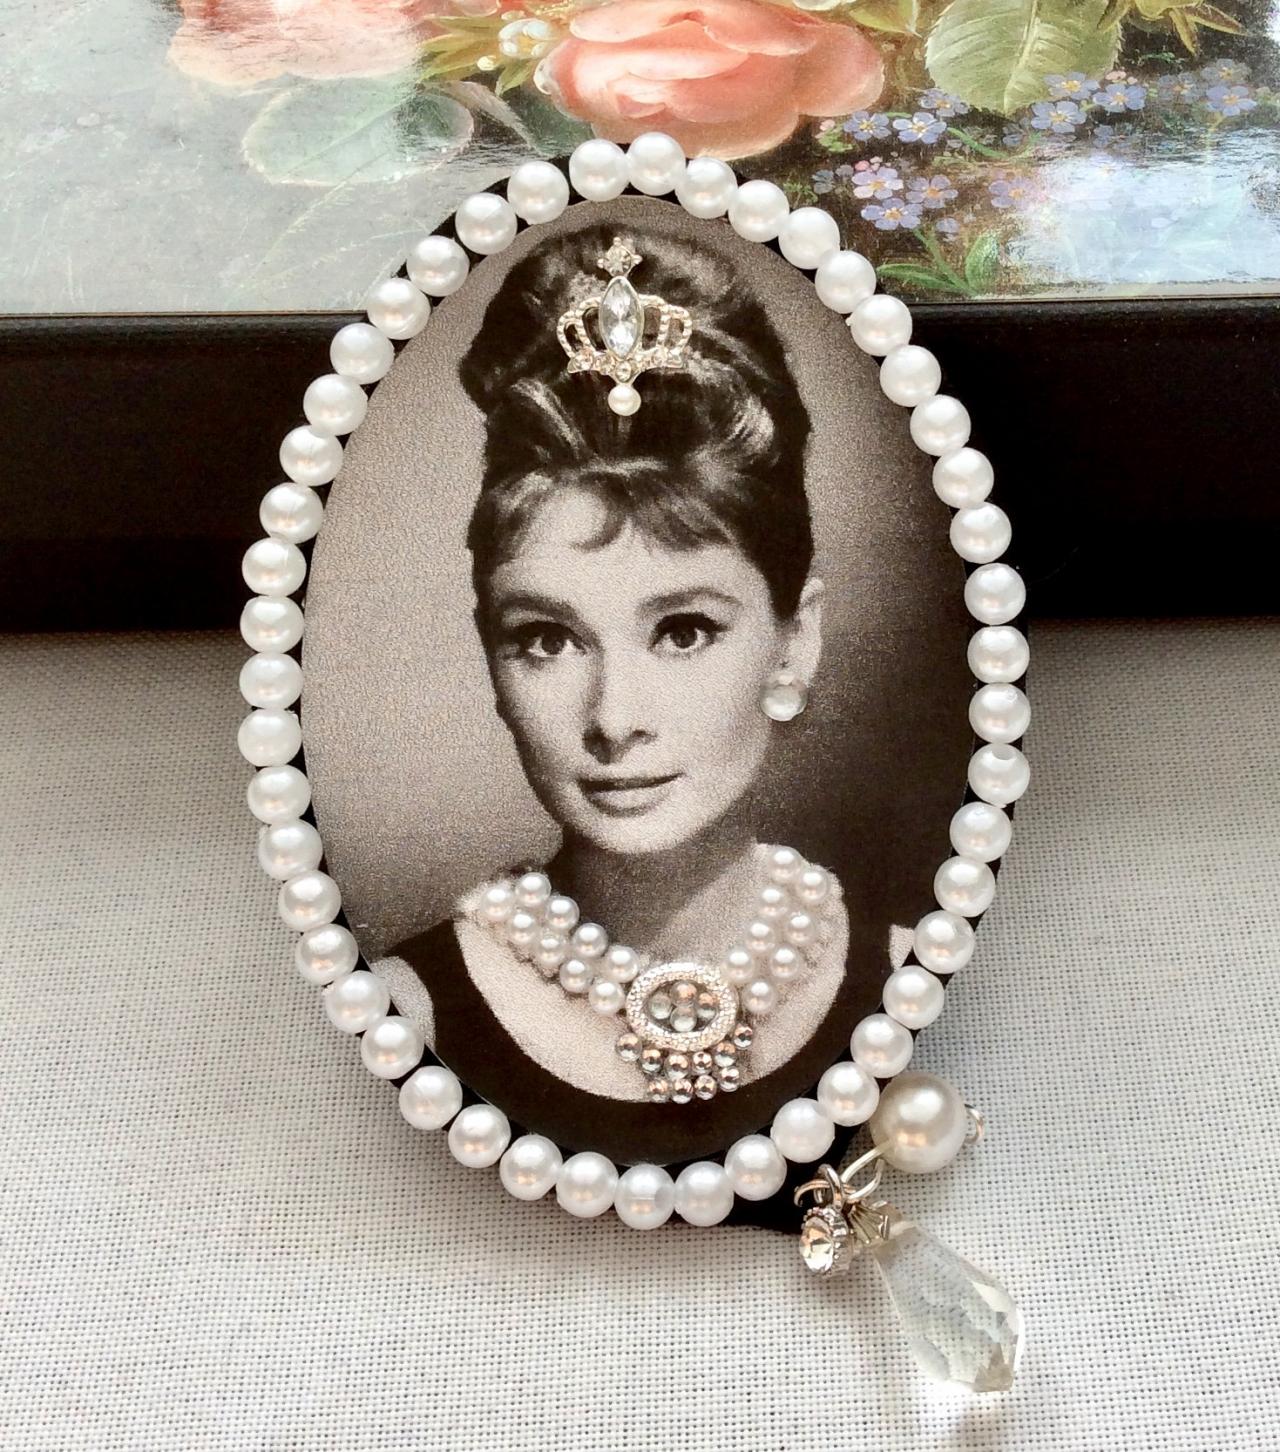 Brooch Vintage Audrey Hepburn Pin Hair Clip Clasp Rockabilly Shabby Chic Pin-up Crown Jewelry 50s 60s Necklace Black White Rhinestones